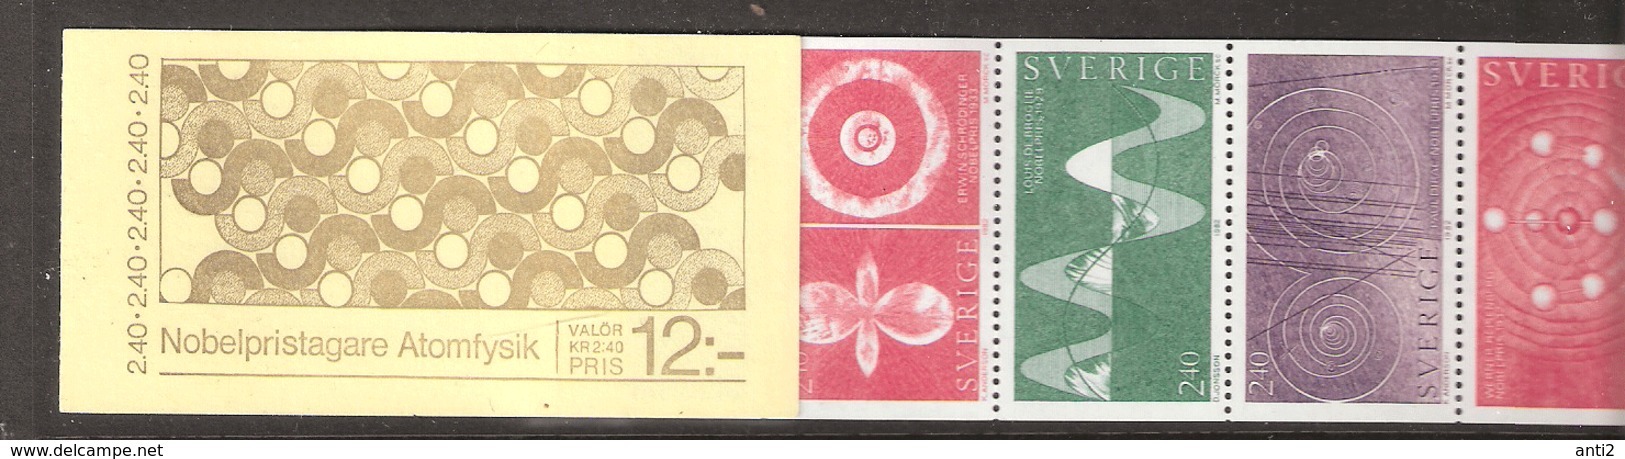 Sweden 1982 Nobel Prices Of Atomphysics Booklet MH 91 With 1214-1218 MNH(**) - Unused Stamps